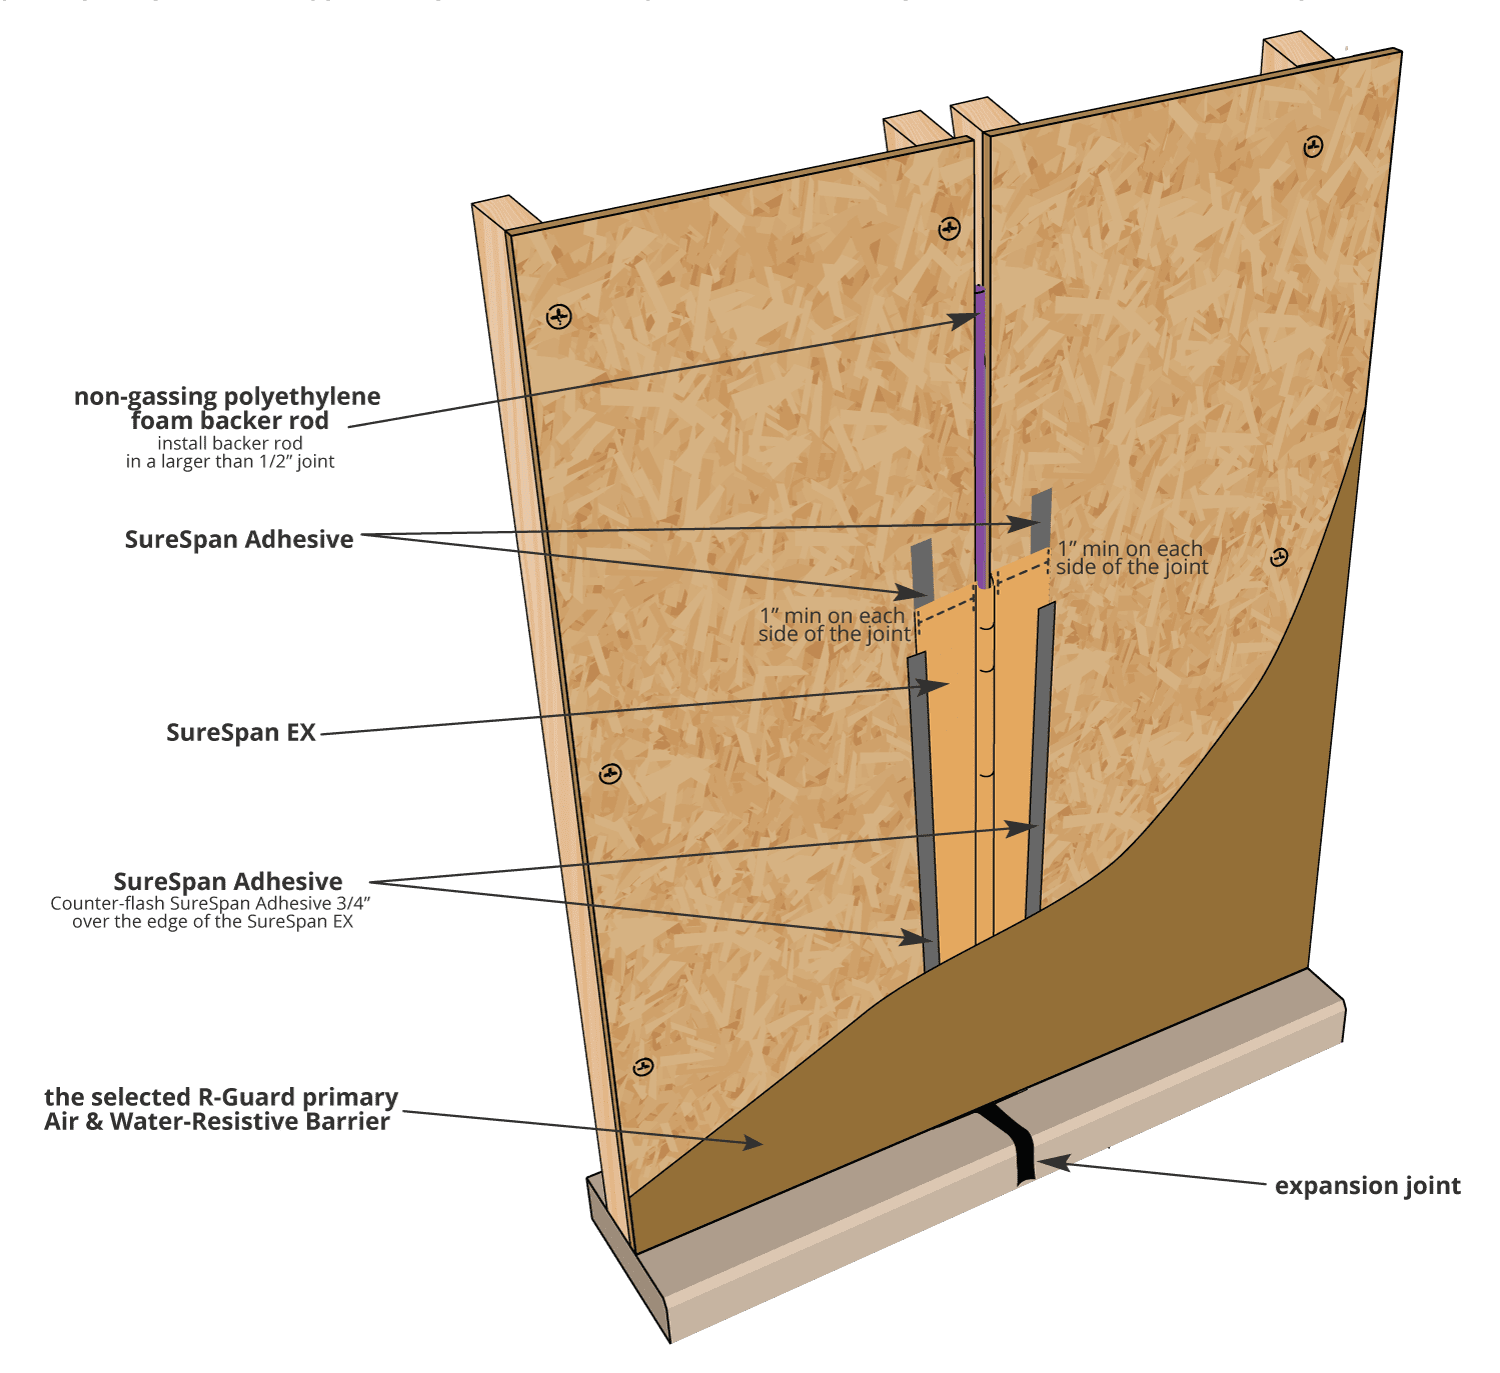 R-Guard-Install-13.2-Vertical-Expansion-Joint--wood-construction-with-plywood